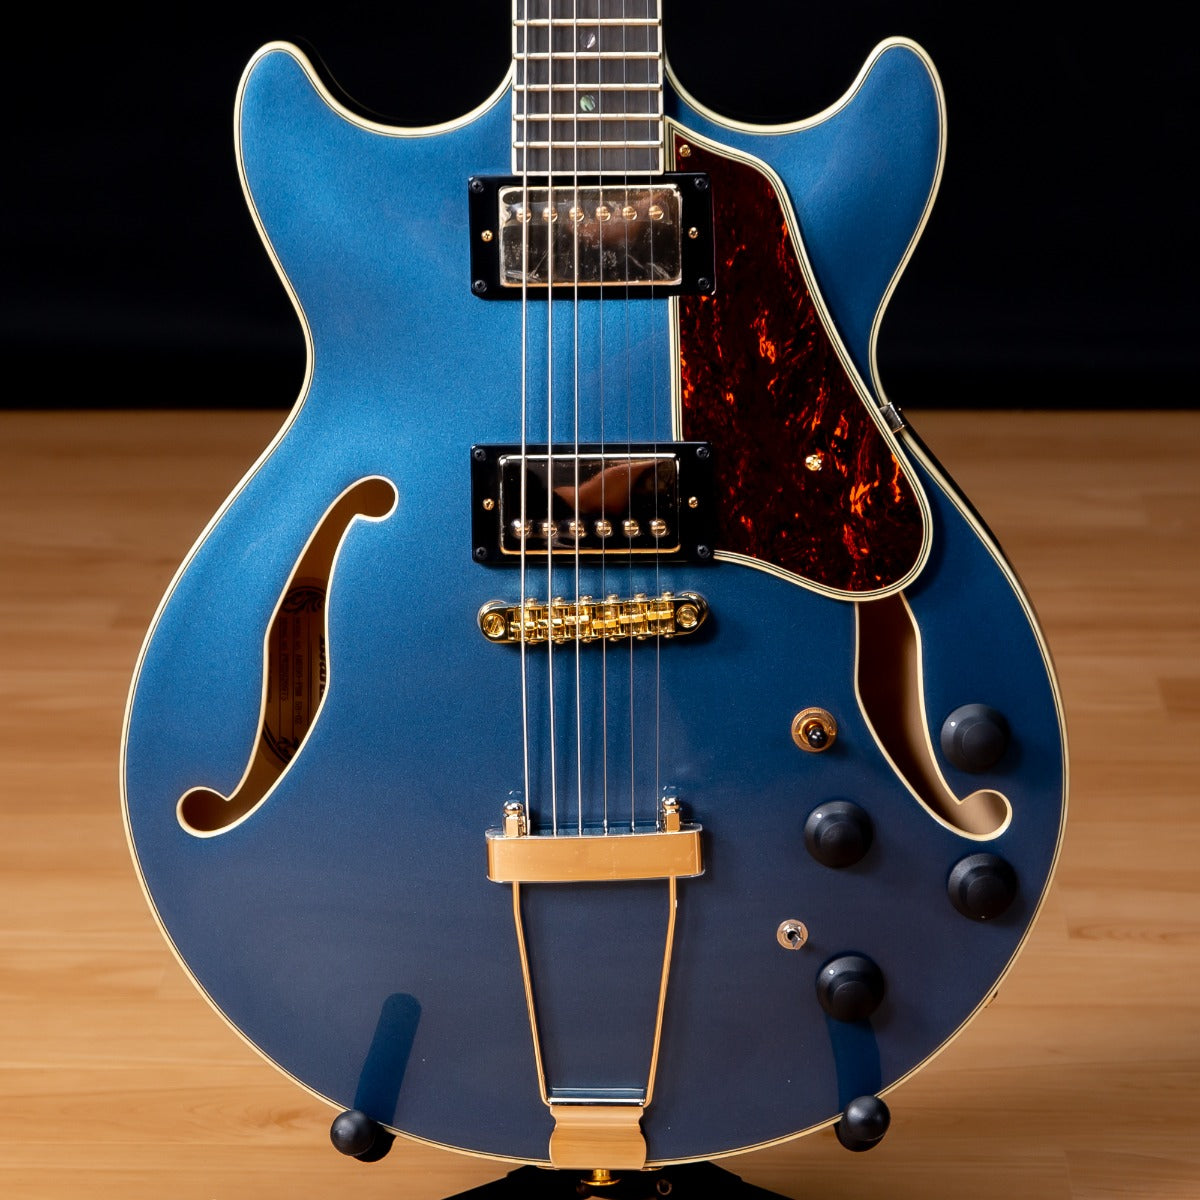 Ibanez AMH90 AM Artcore Expressionist Semi-Hollow Electric Guitar - Prussian Blue Metallic view 1